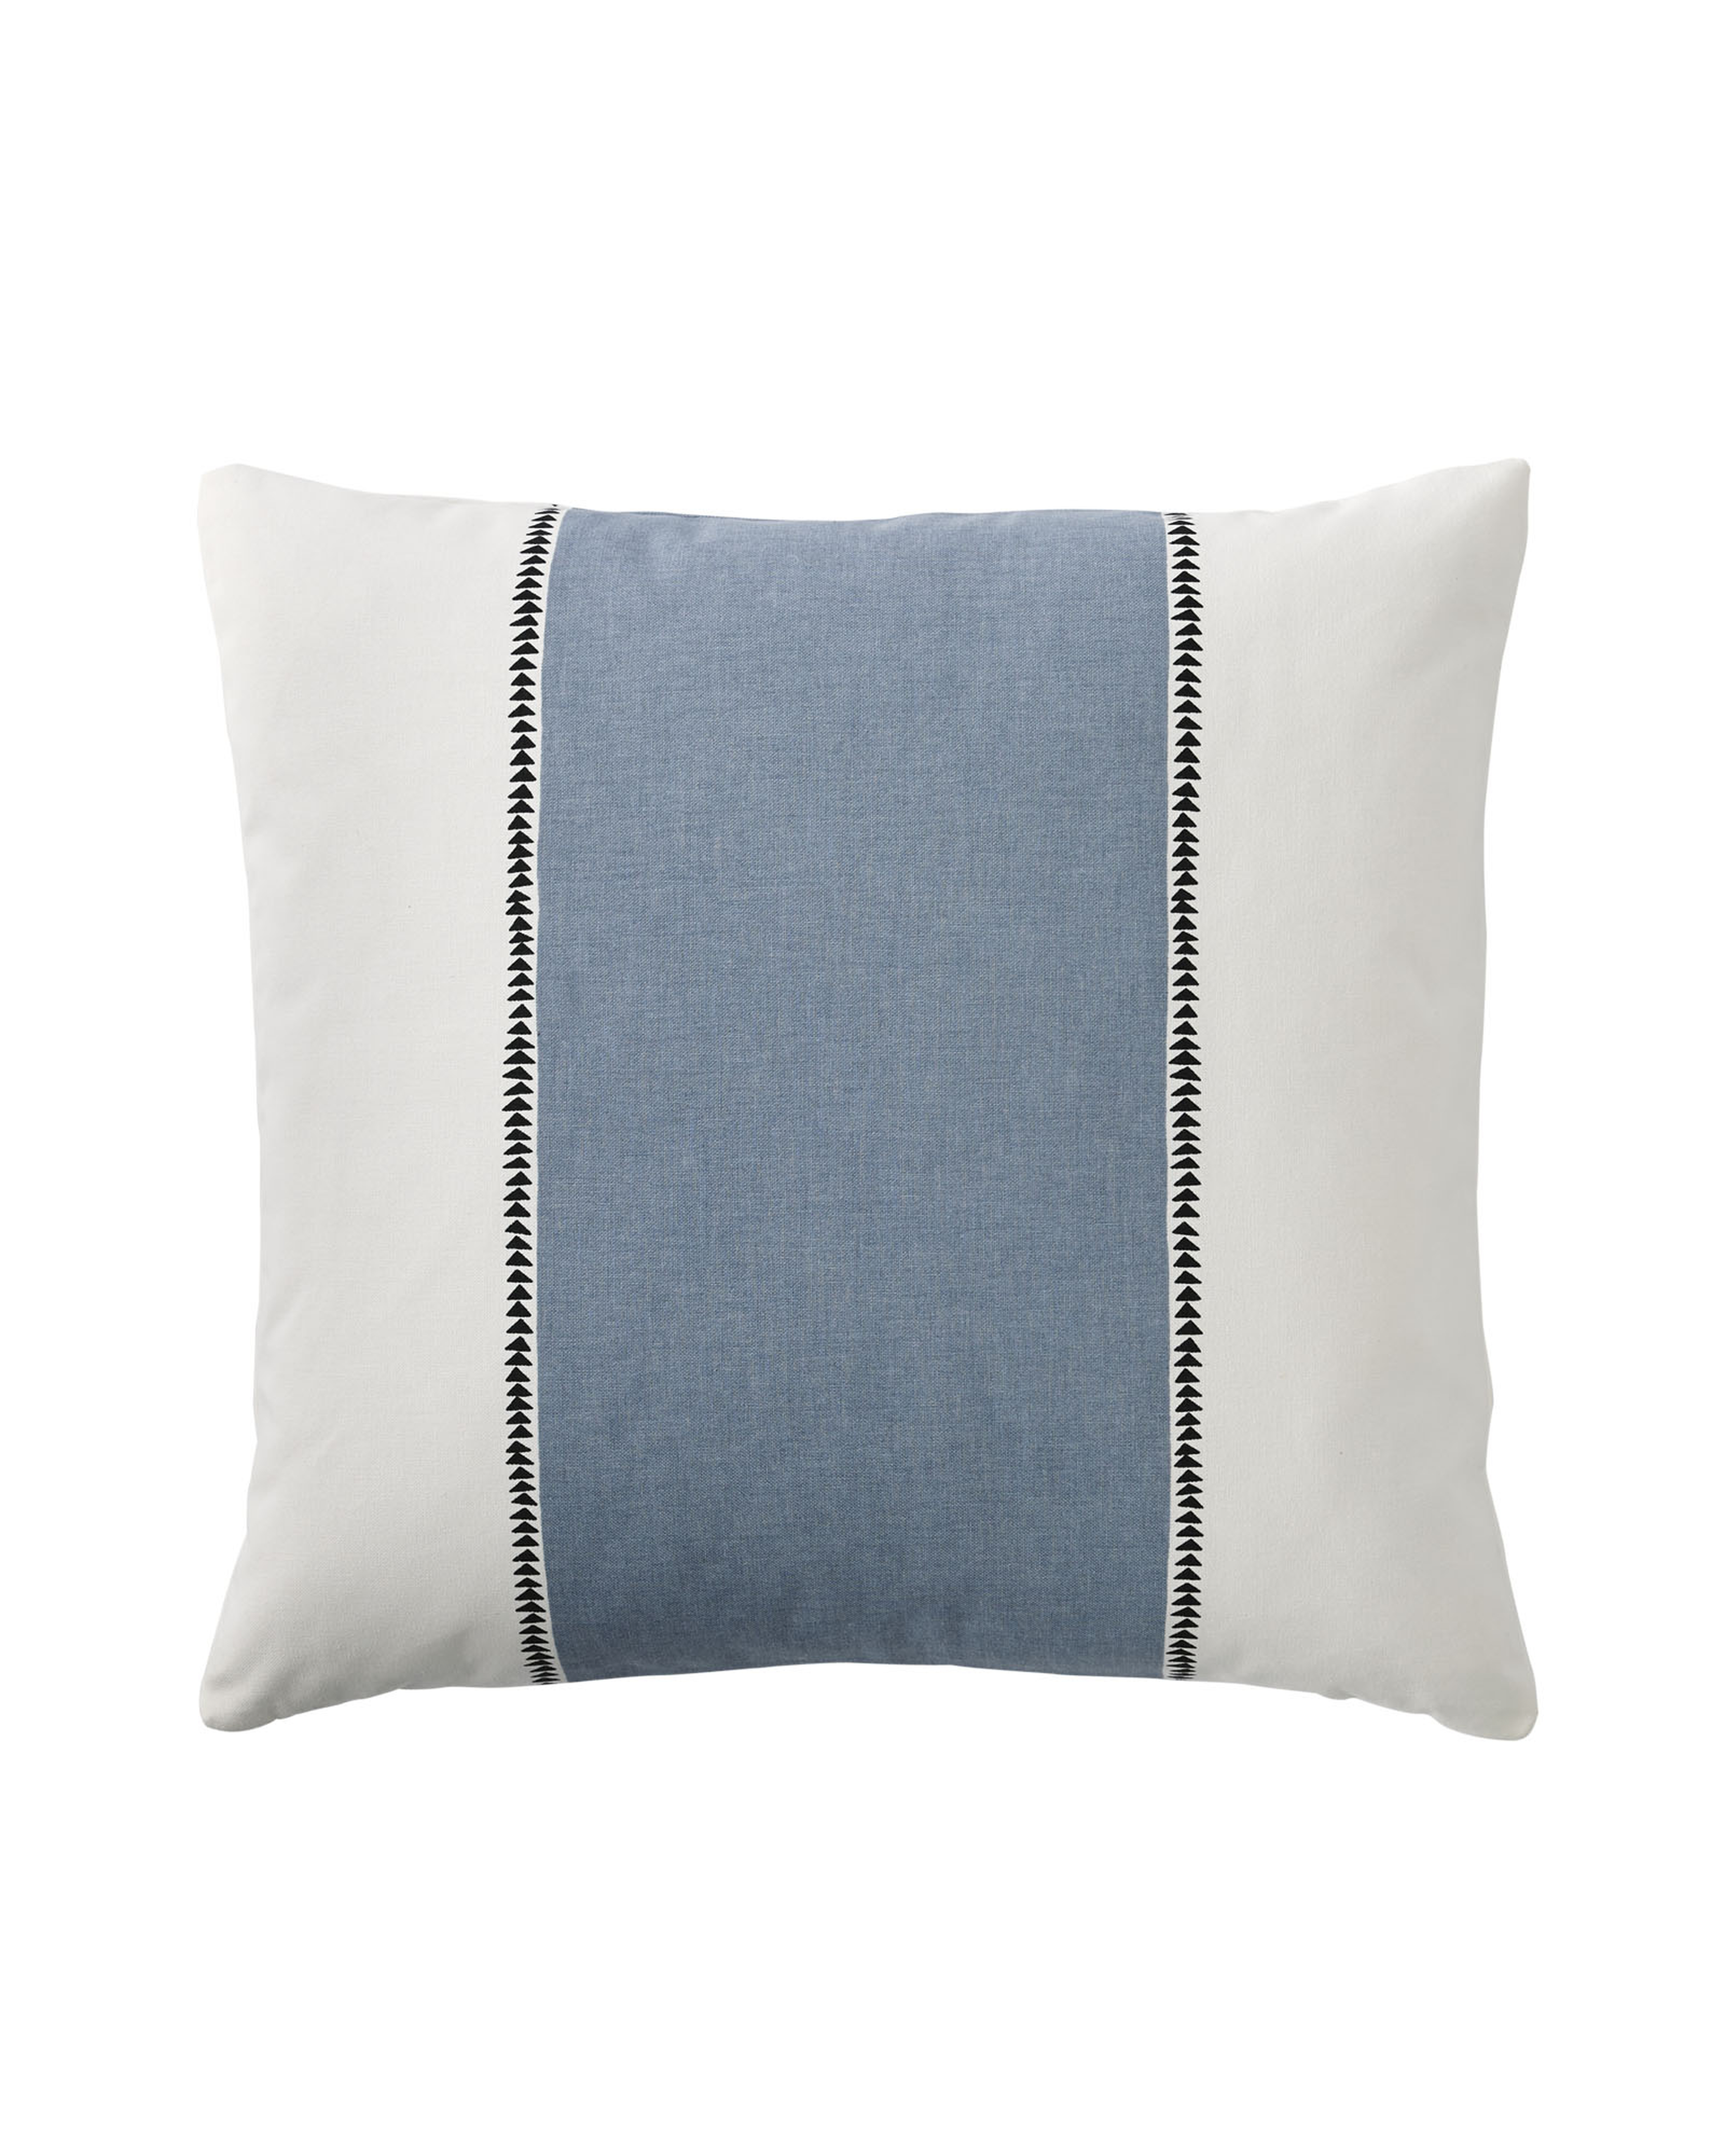 Racing Stripe Pillow Cover - 20" x 20" - Chambray - Insert sold separately - Serena and Lily